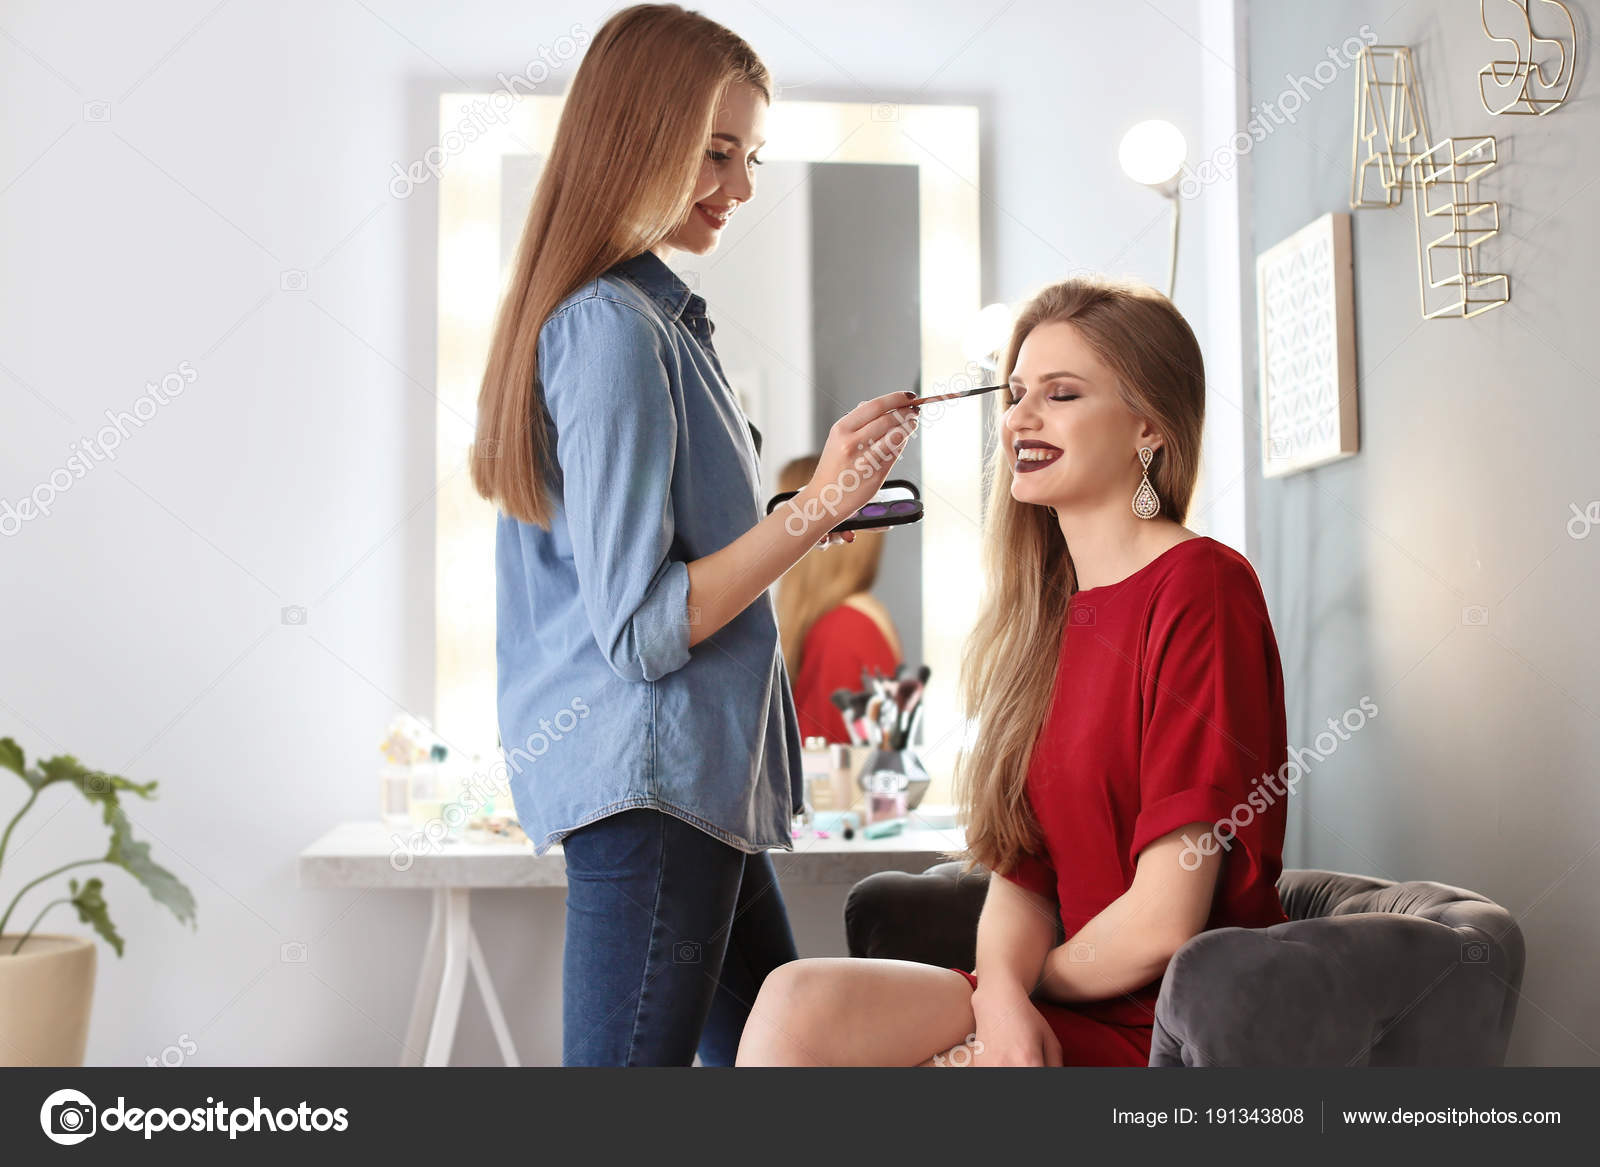 Professional Makeup Artist Working With Beautiful Young Woman In